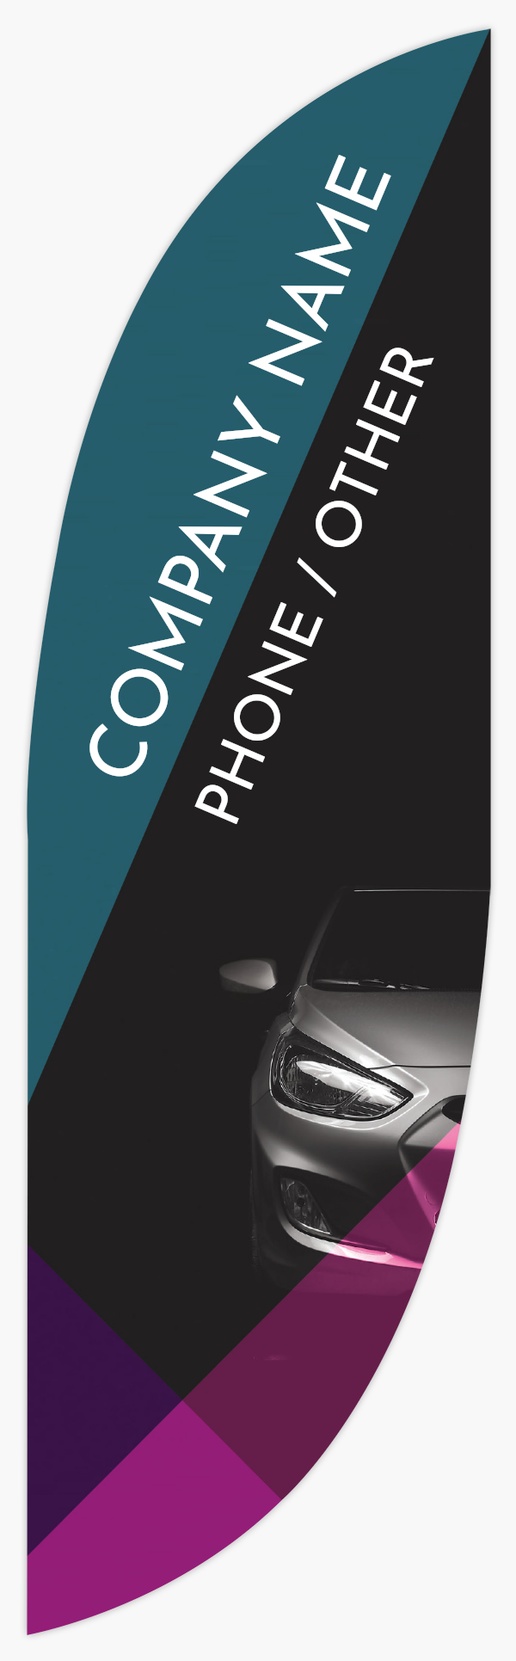 A car insurance colorful black gray design for Modern & Simple